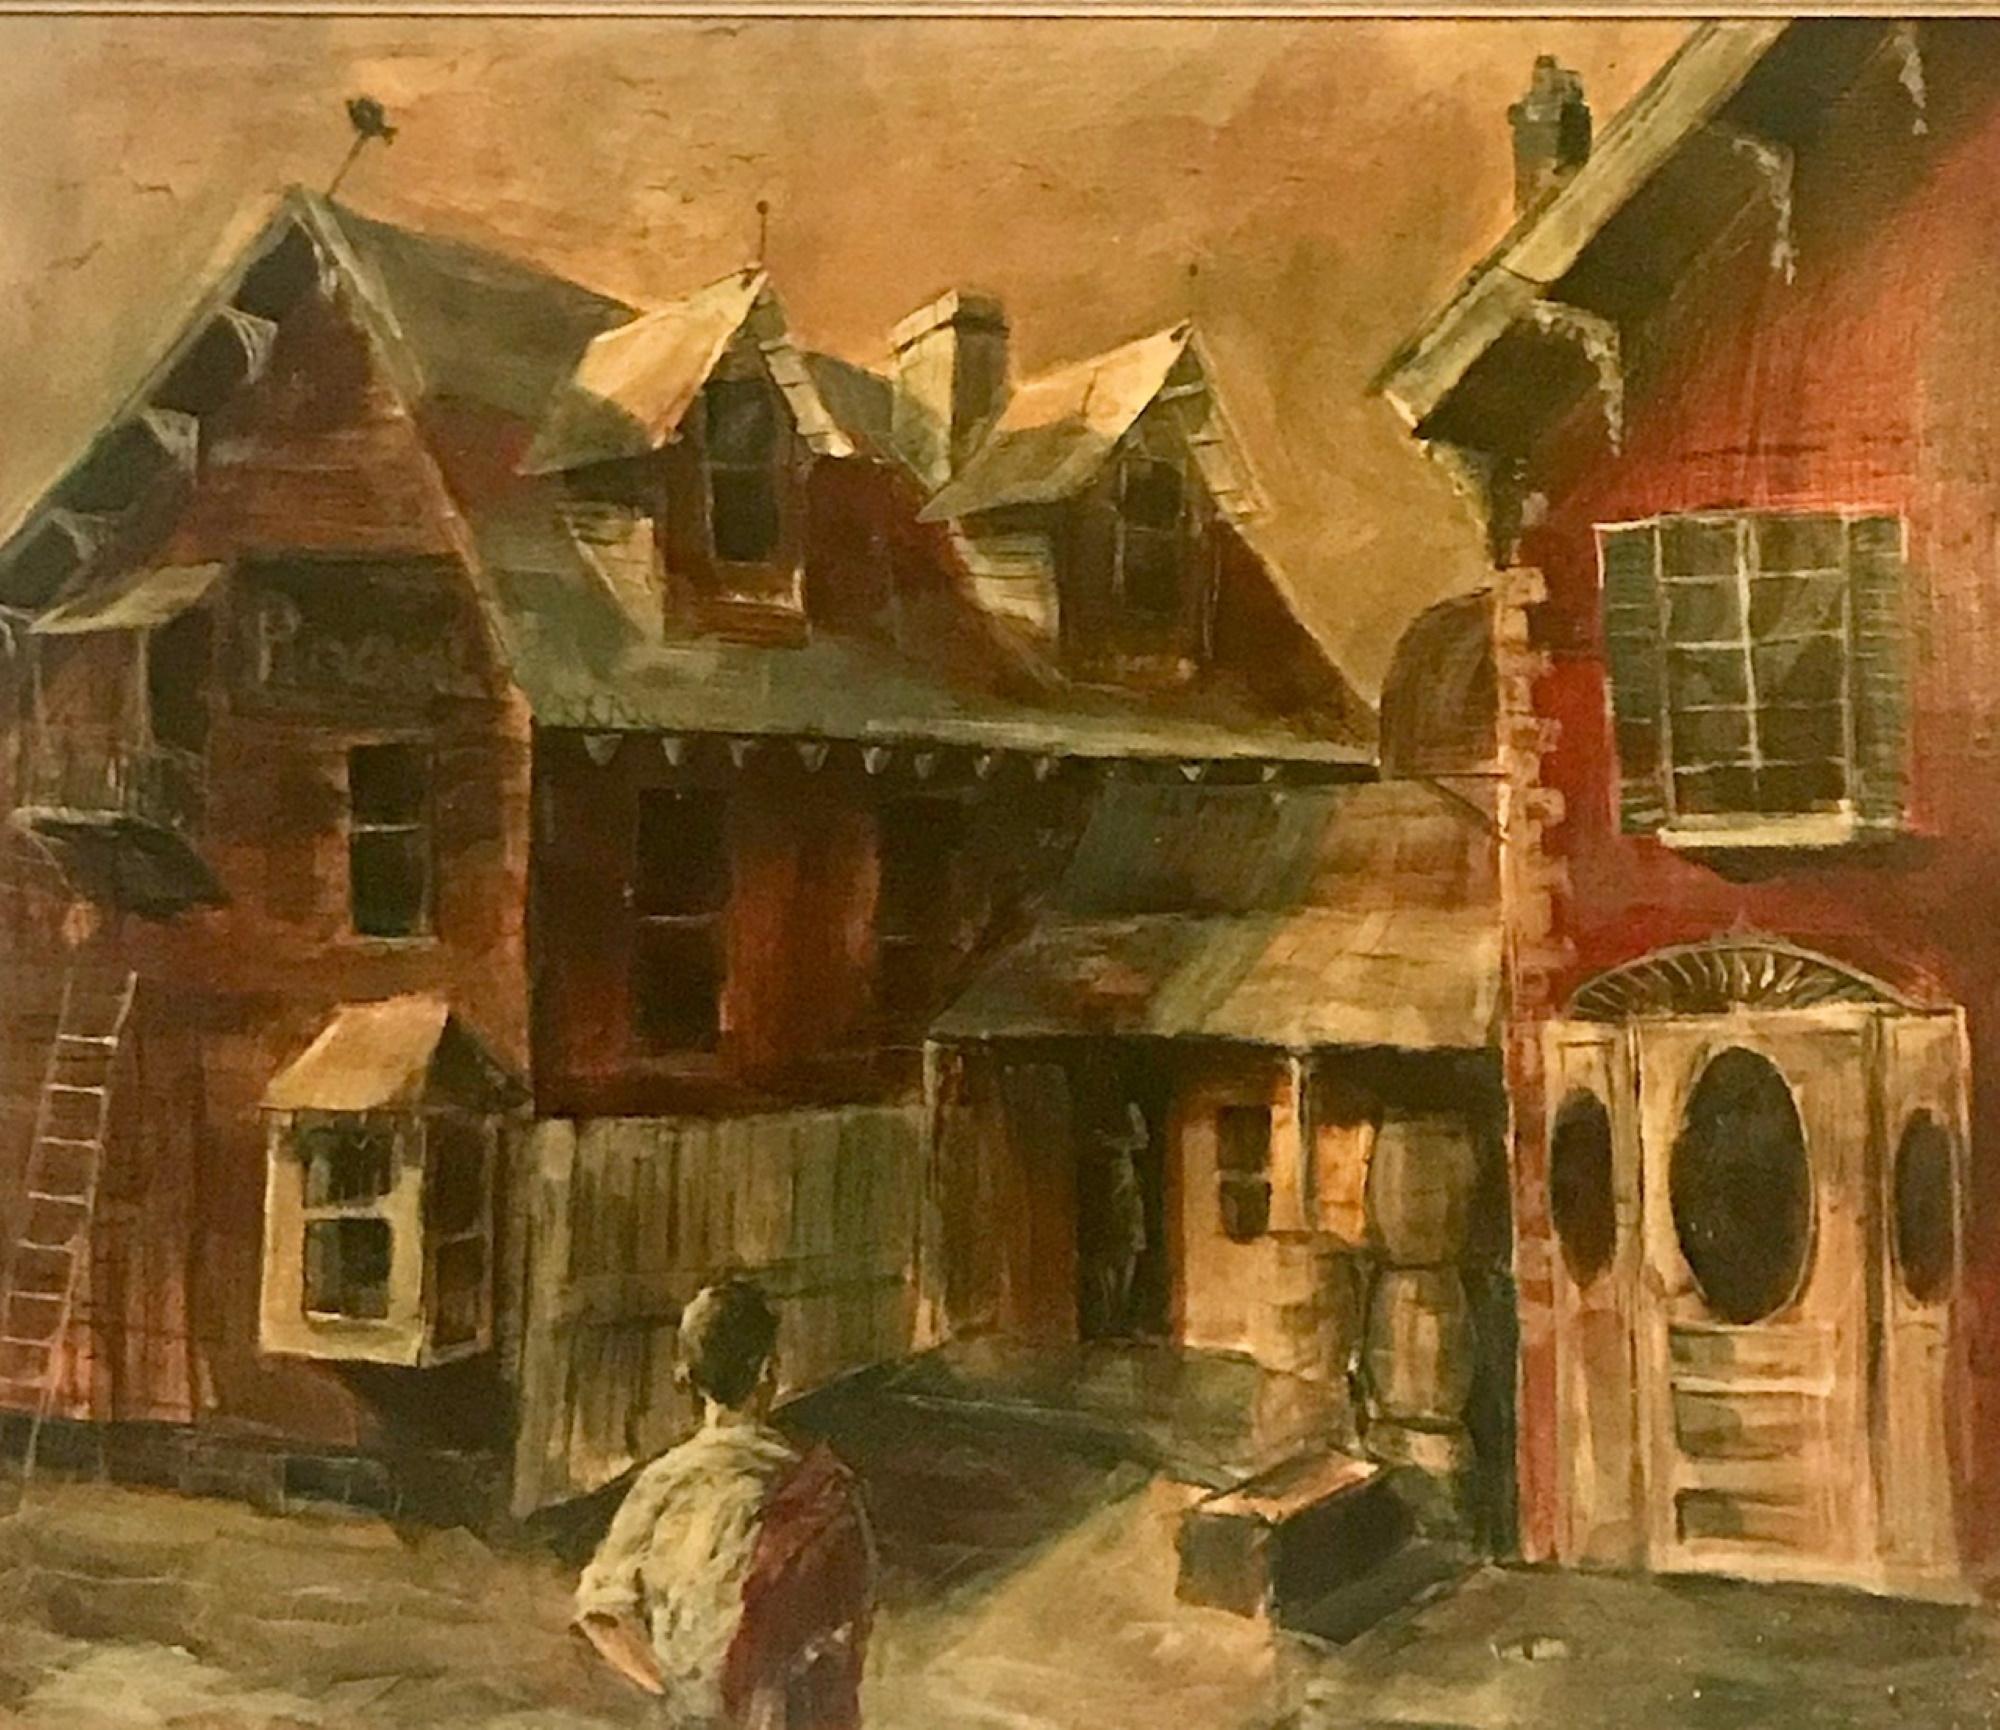 Original oil painting location of the 1957 Movie “Peyton Place” with Lana Turner

This painting was executed by the award winning young artist Ric Lee. It pictured the location of the famous movie “Peyton Place”. The impressionist style of the